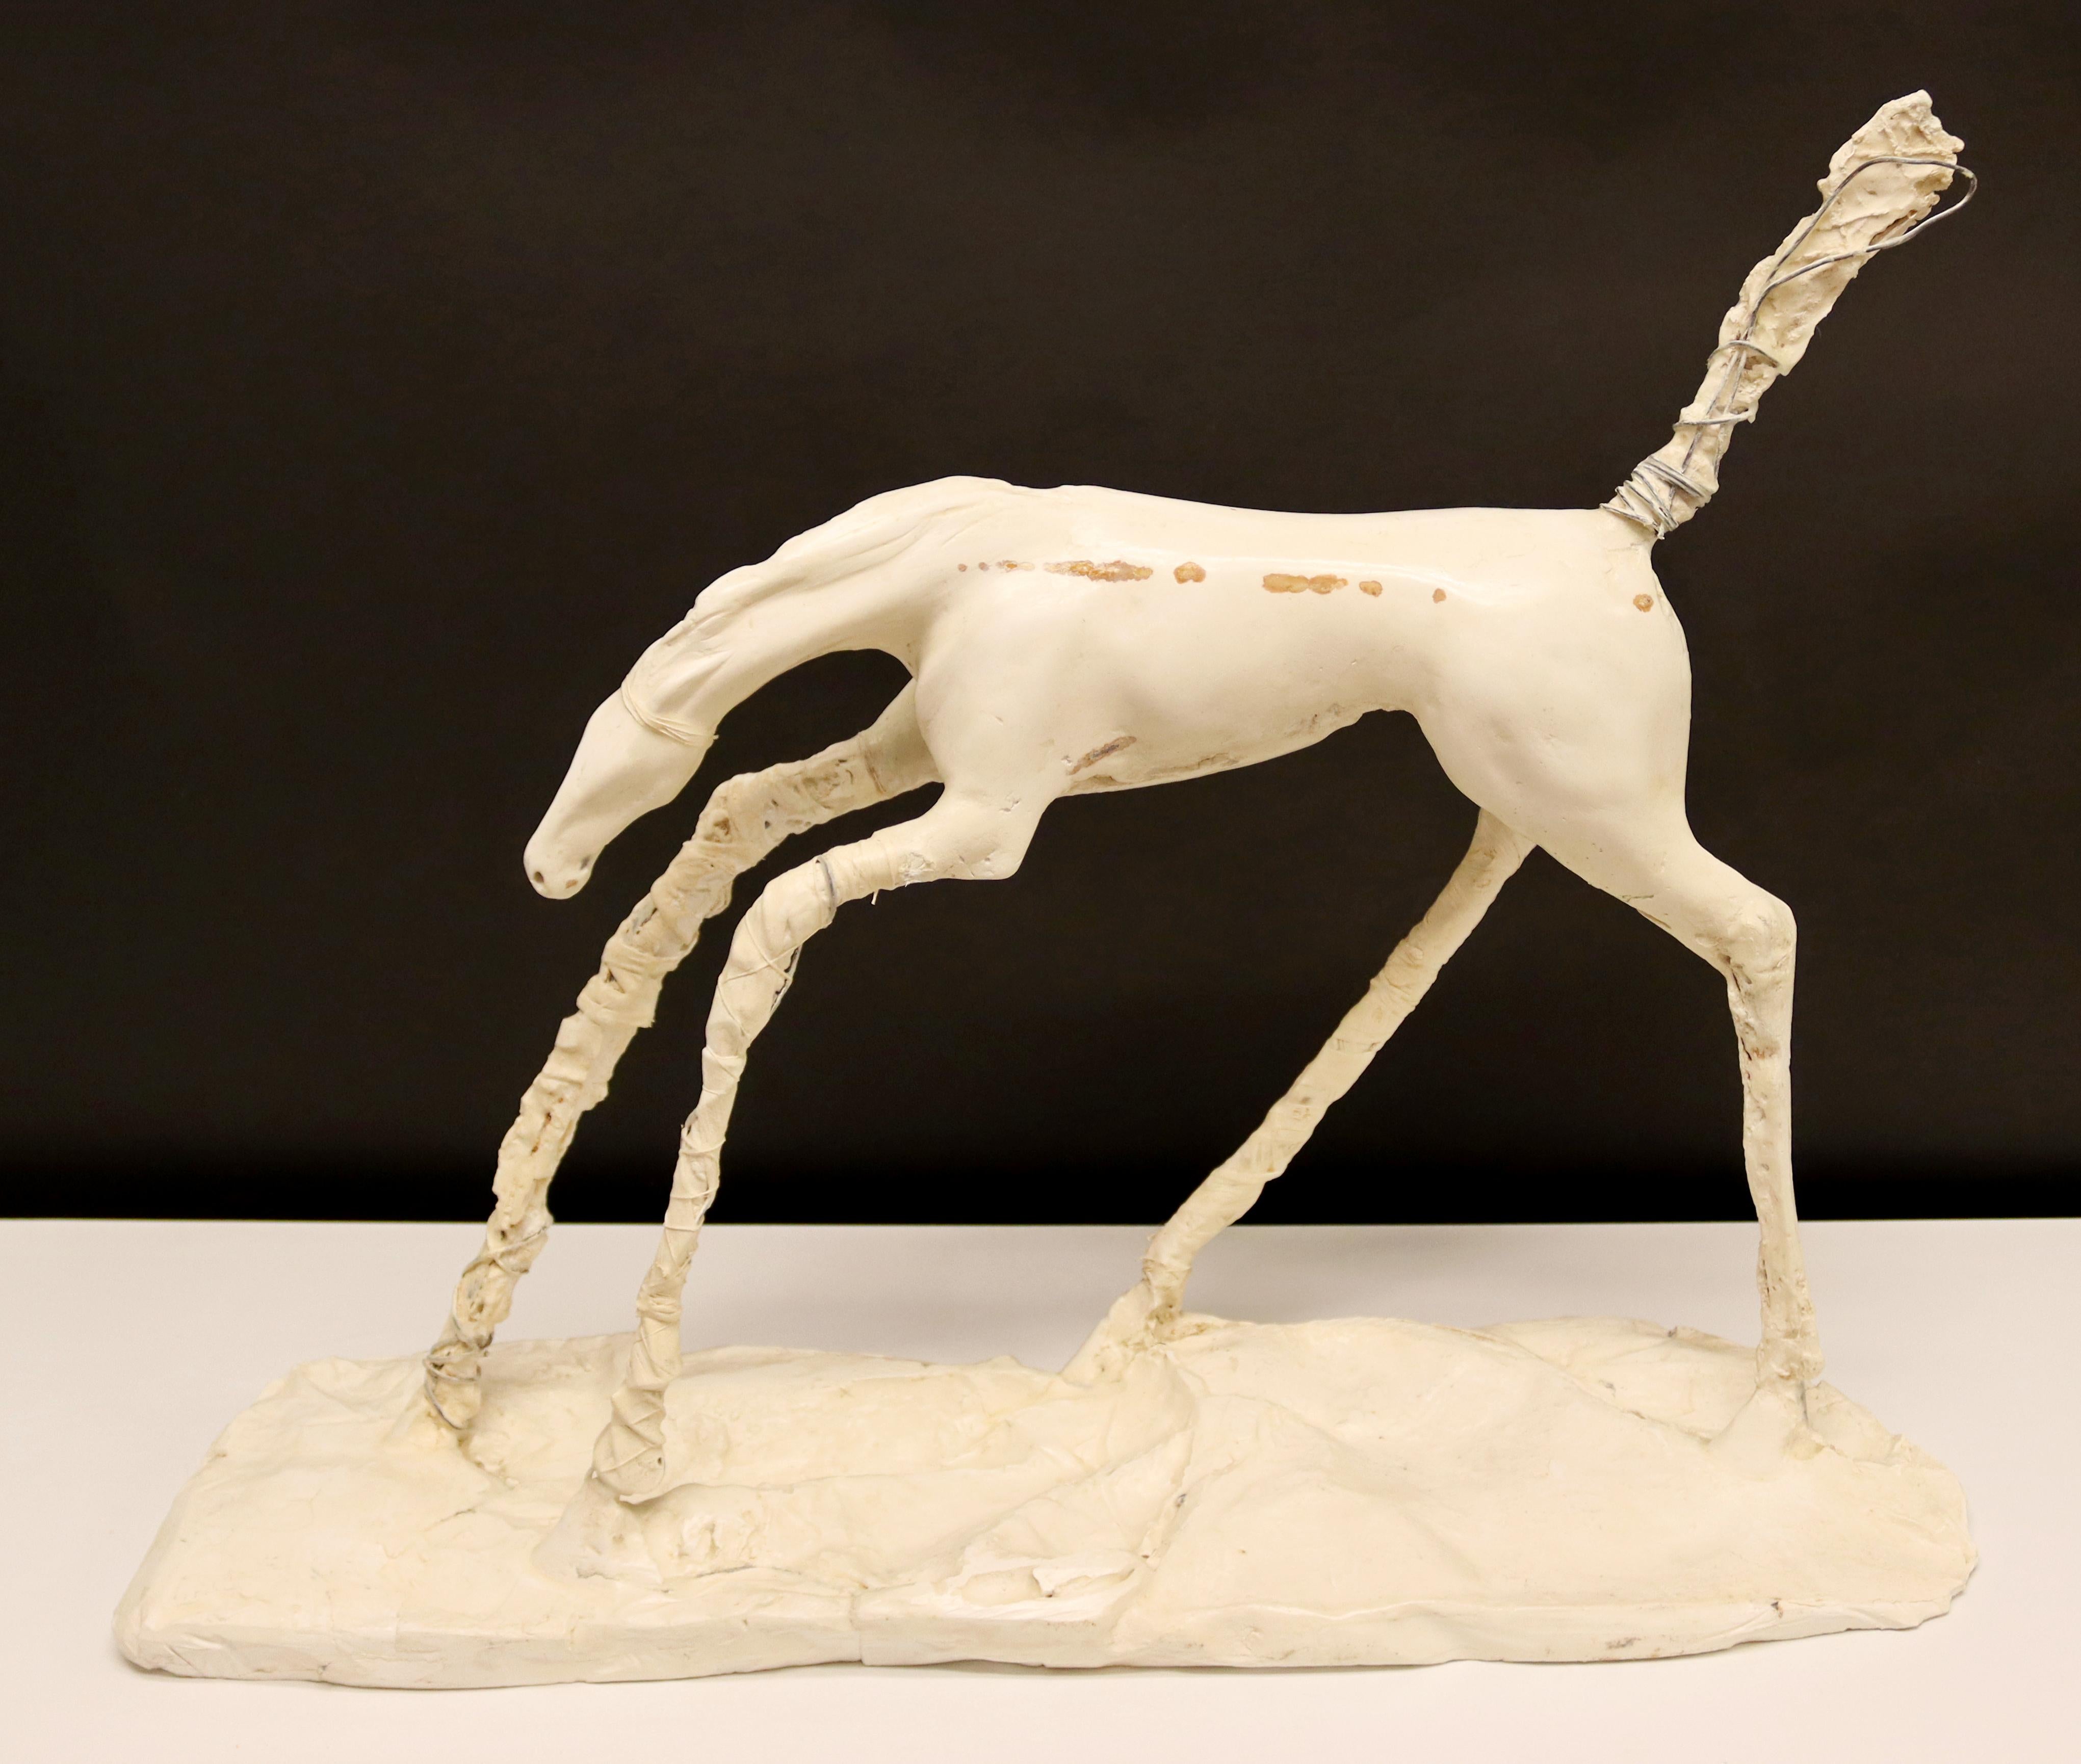 For your consideration is a stupendously unique, plaster table sculpture of a horse, handmade, signed and dated by Carl Dahl, 1975. In excellent vintage condition. The dimensions are 27